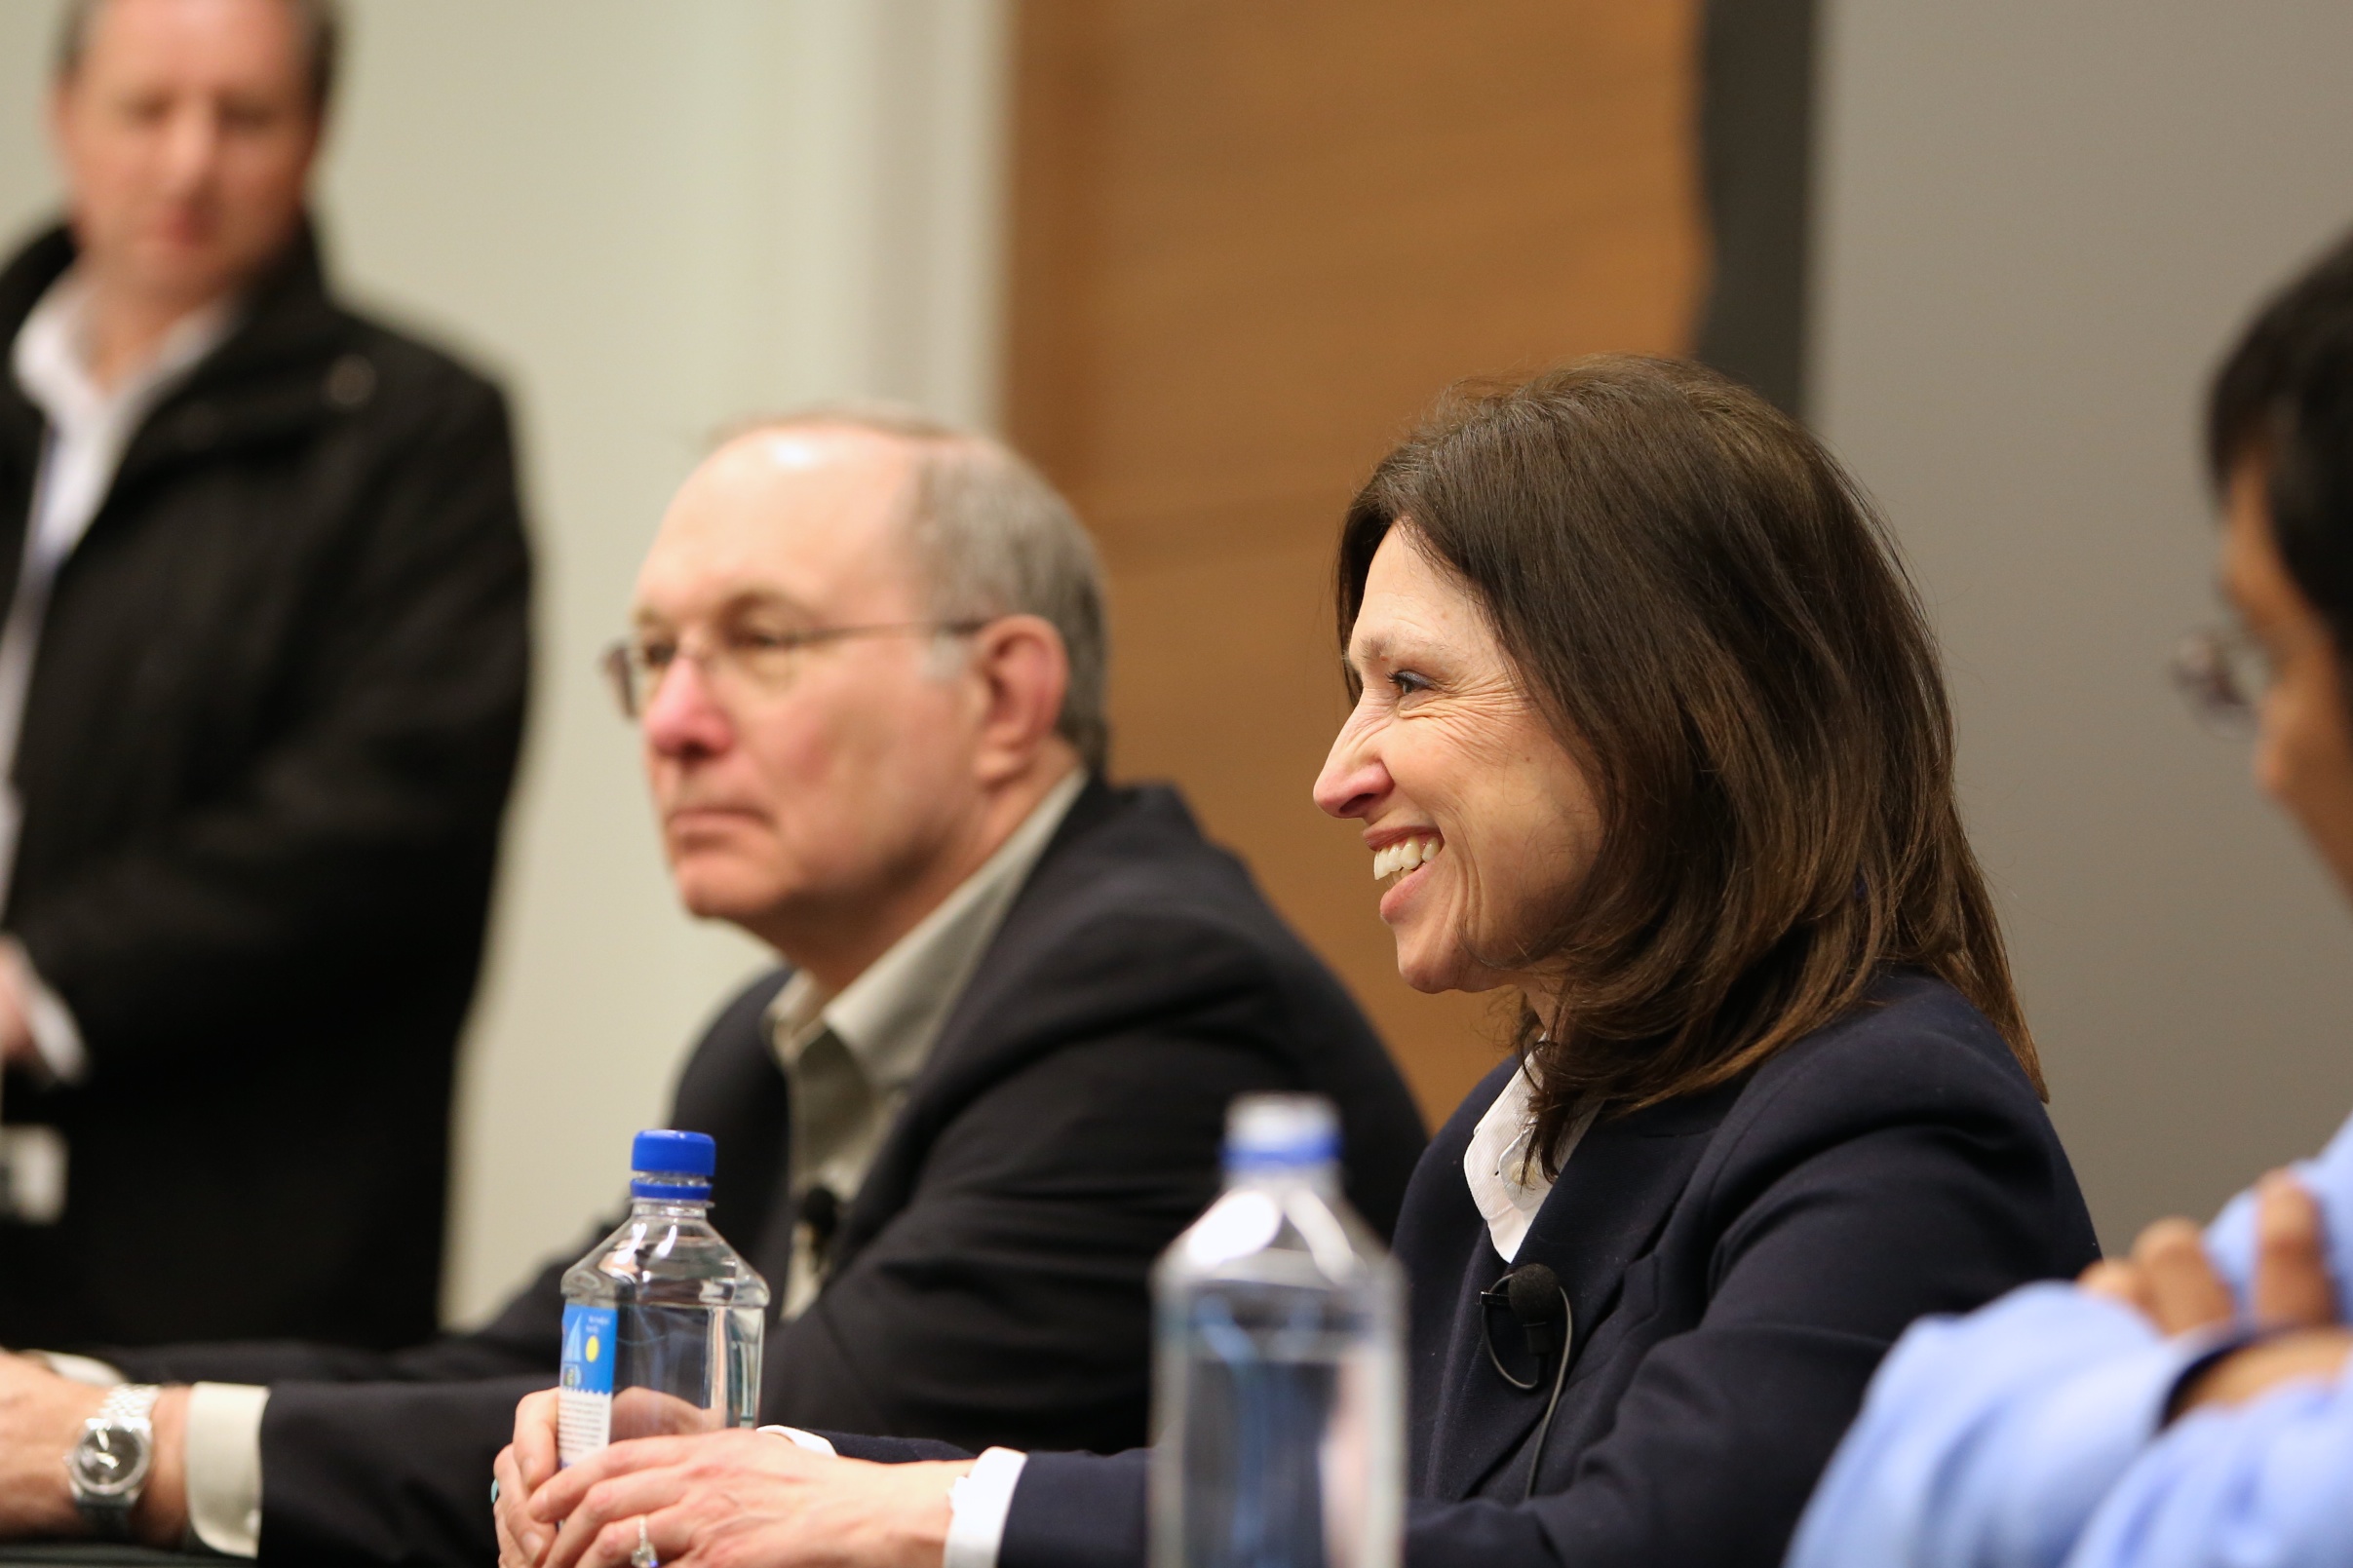 Speakers Dr. Joe Gray, of Knight Cancer Institute of Oregon Health & Science University, and Dr. Carla Grandori, of Fred Hutchinson Cancer Research Center, answer questions during a panel discussion.